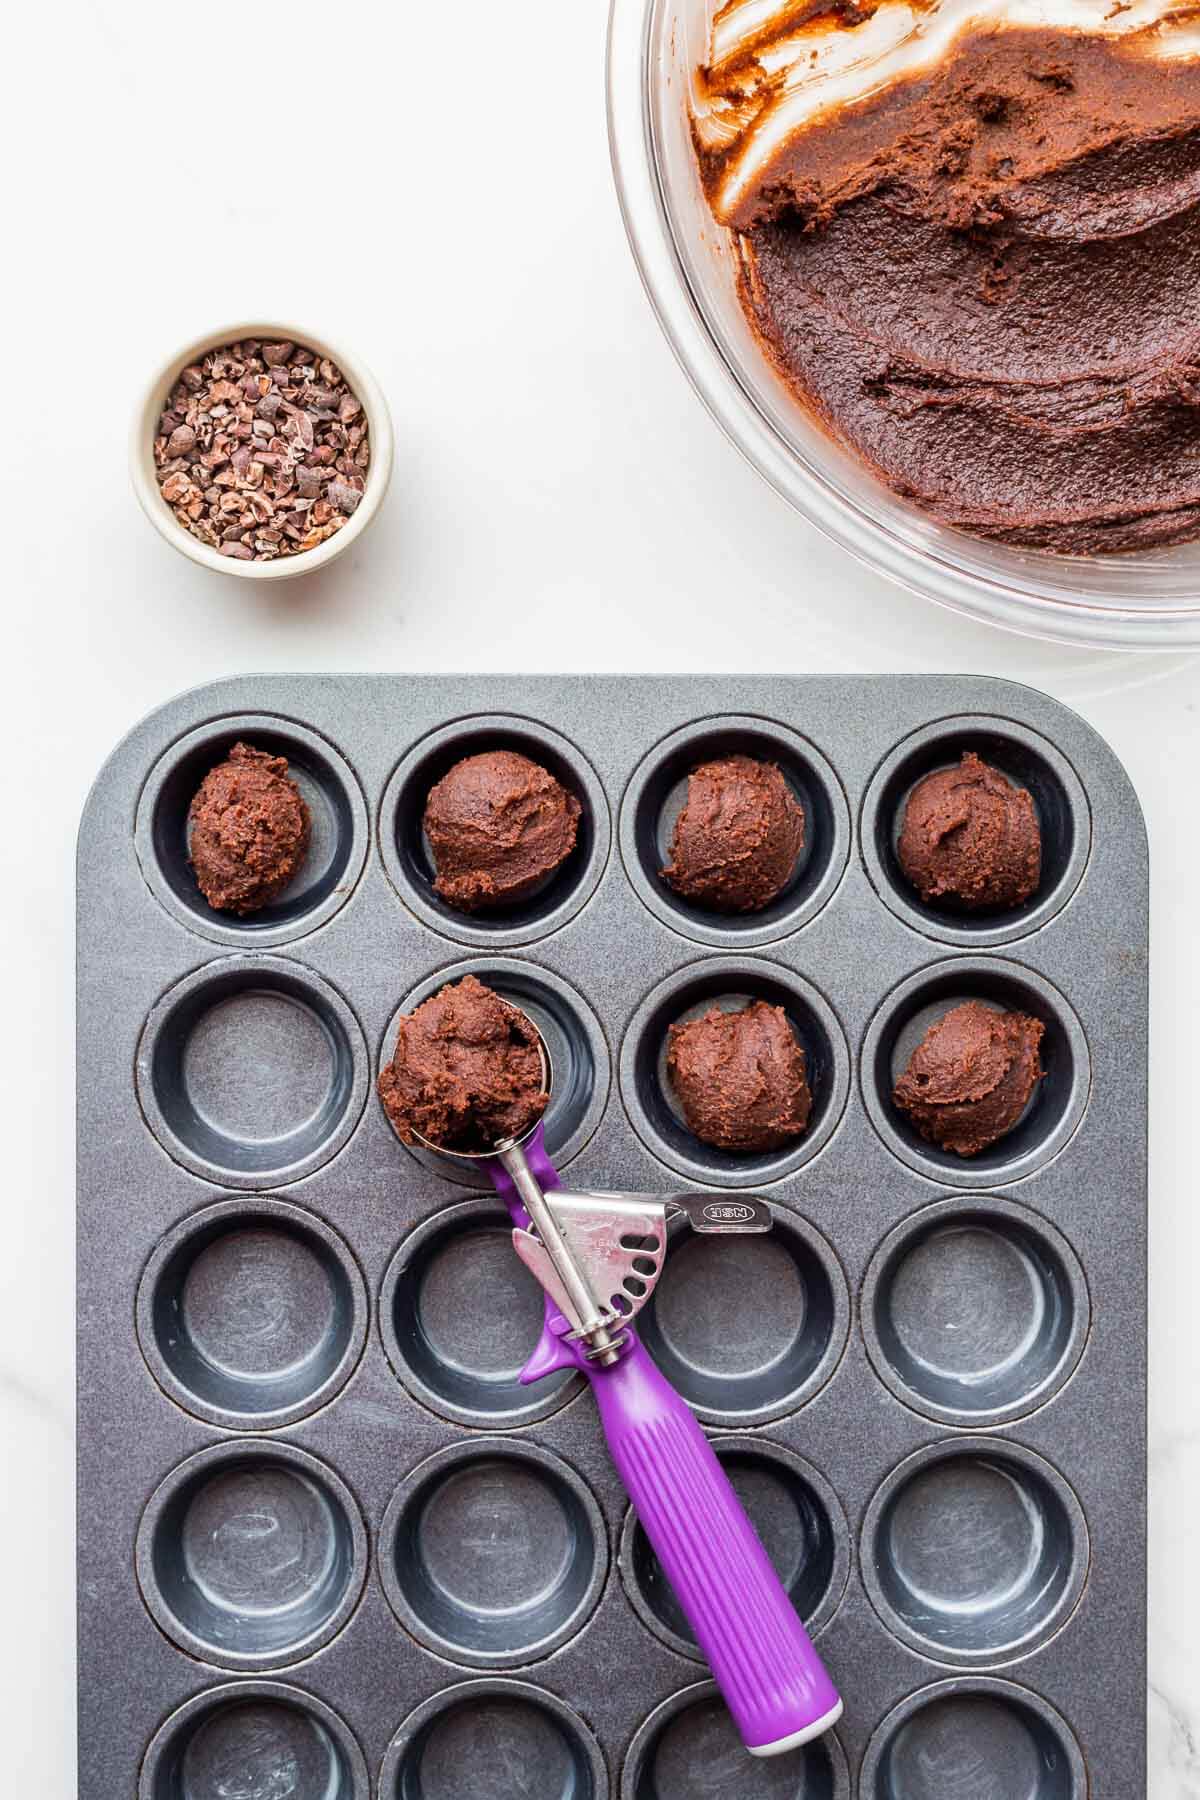 Portioning chocolate batter into buttered muffin pan with a cookie scoop (disher) to make financier cakes.